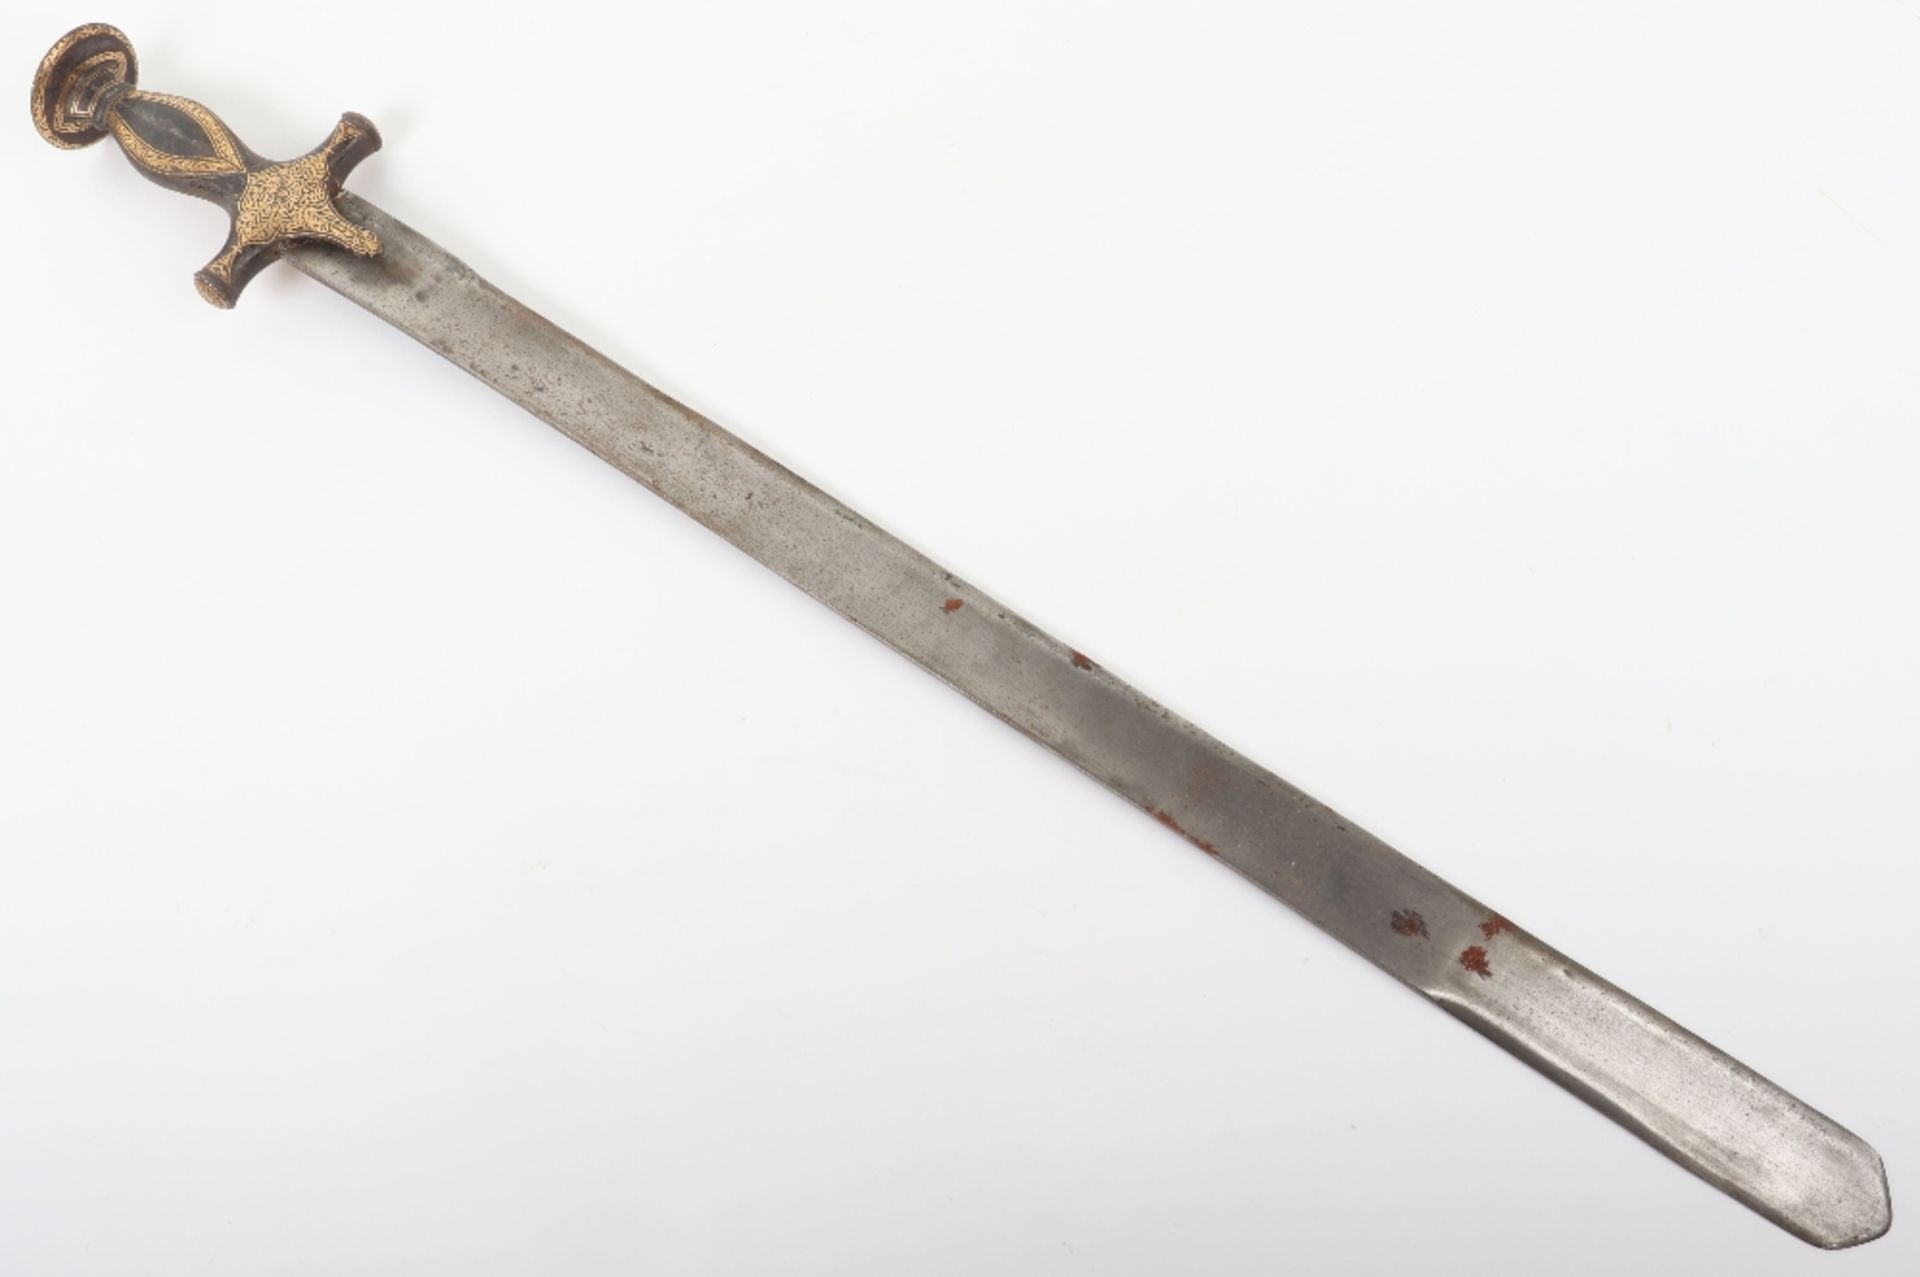 Decorative Indian Sword Tulwar Perhaps for a Youth - Image 13 of 13